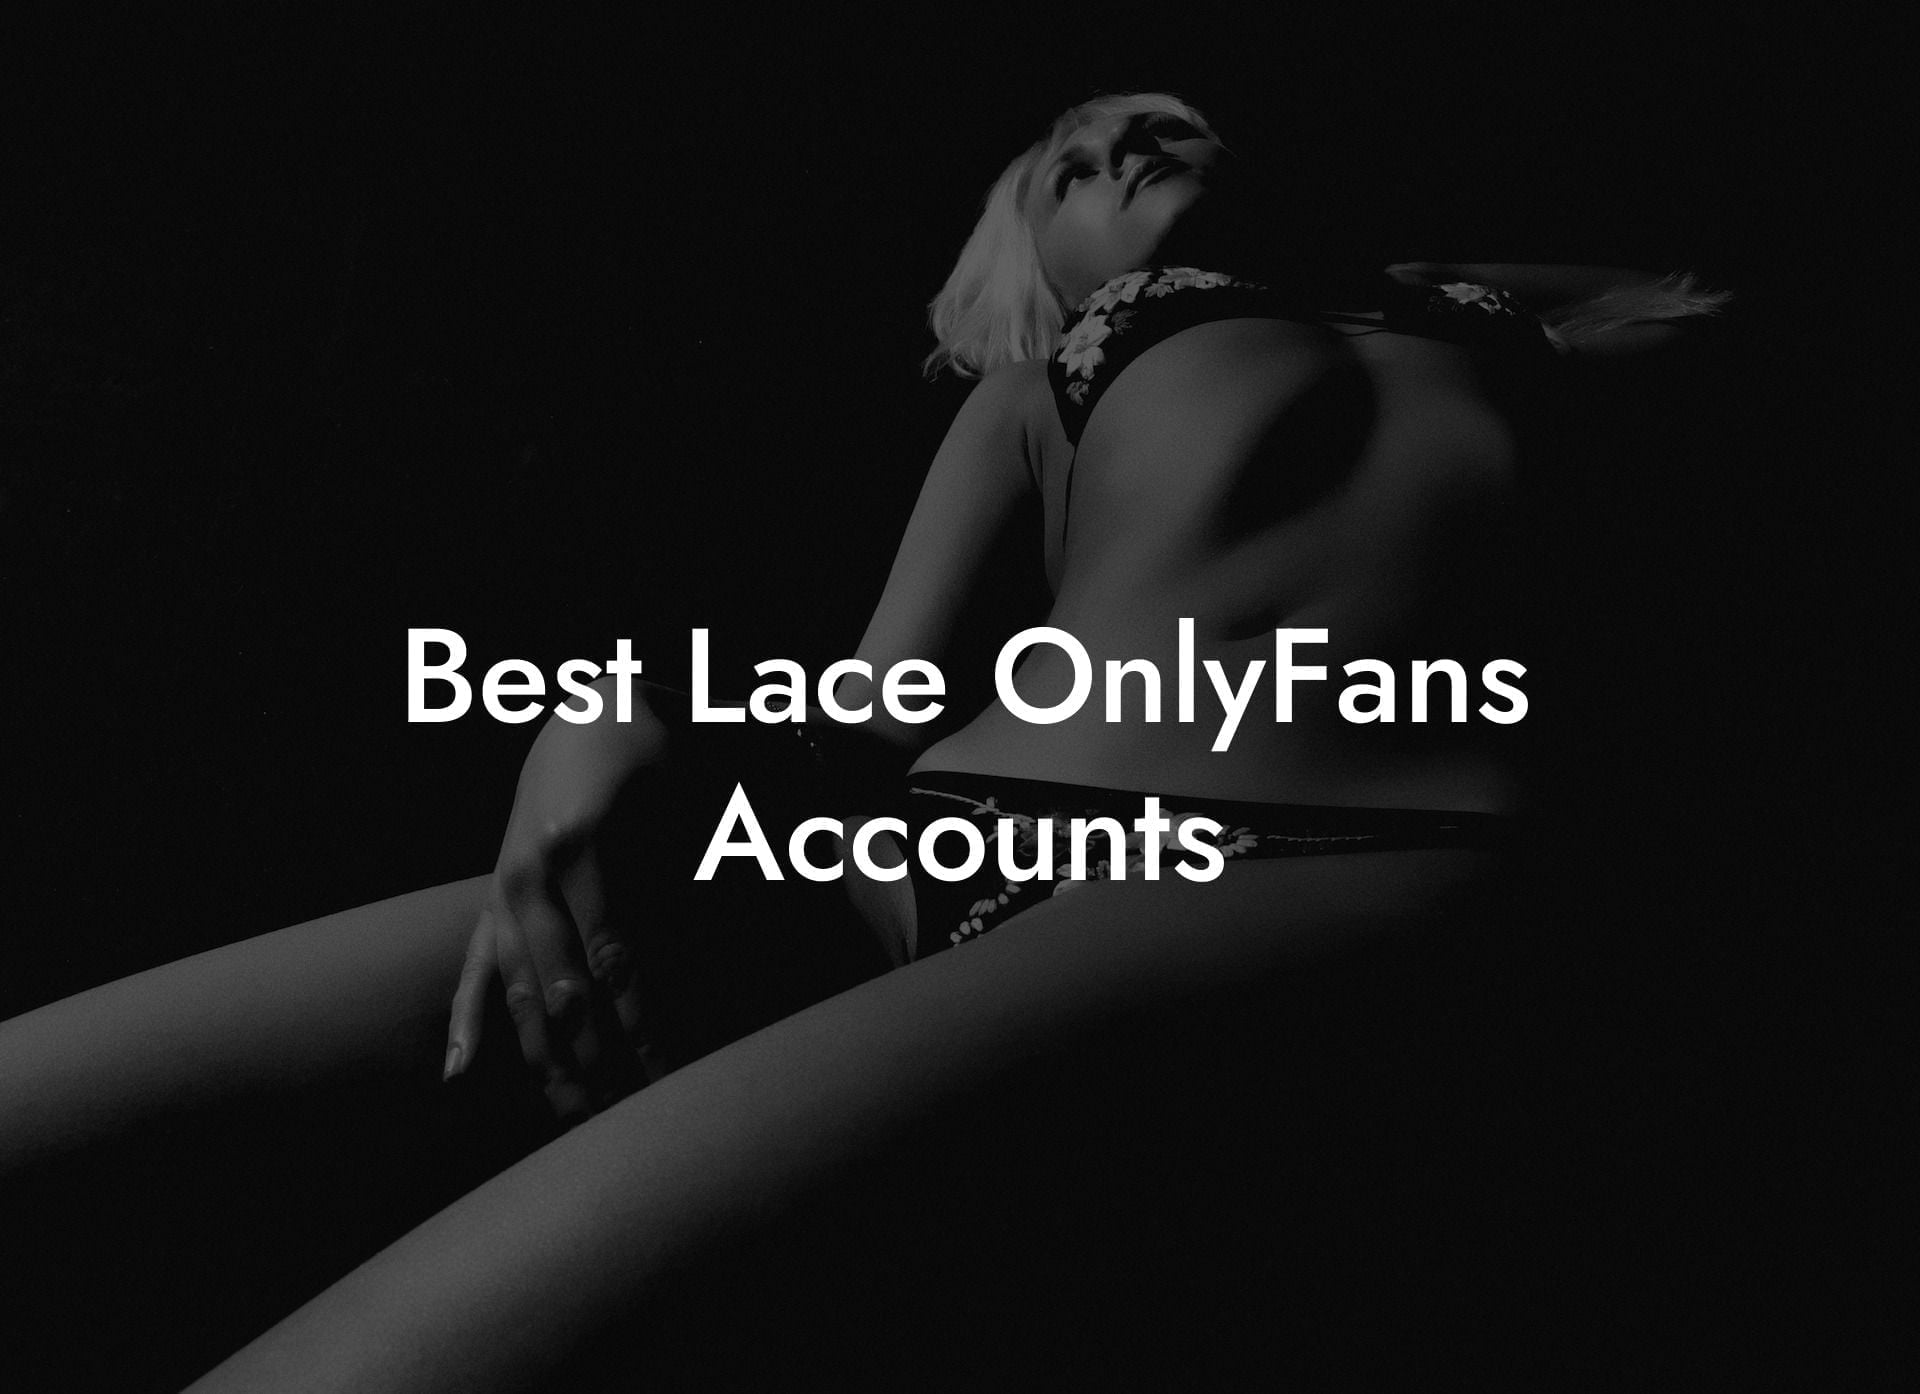 Best Lace OnlyFans Accounts